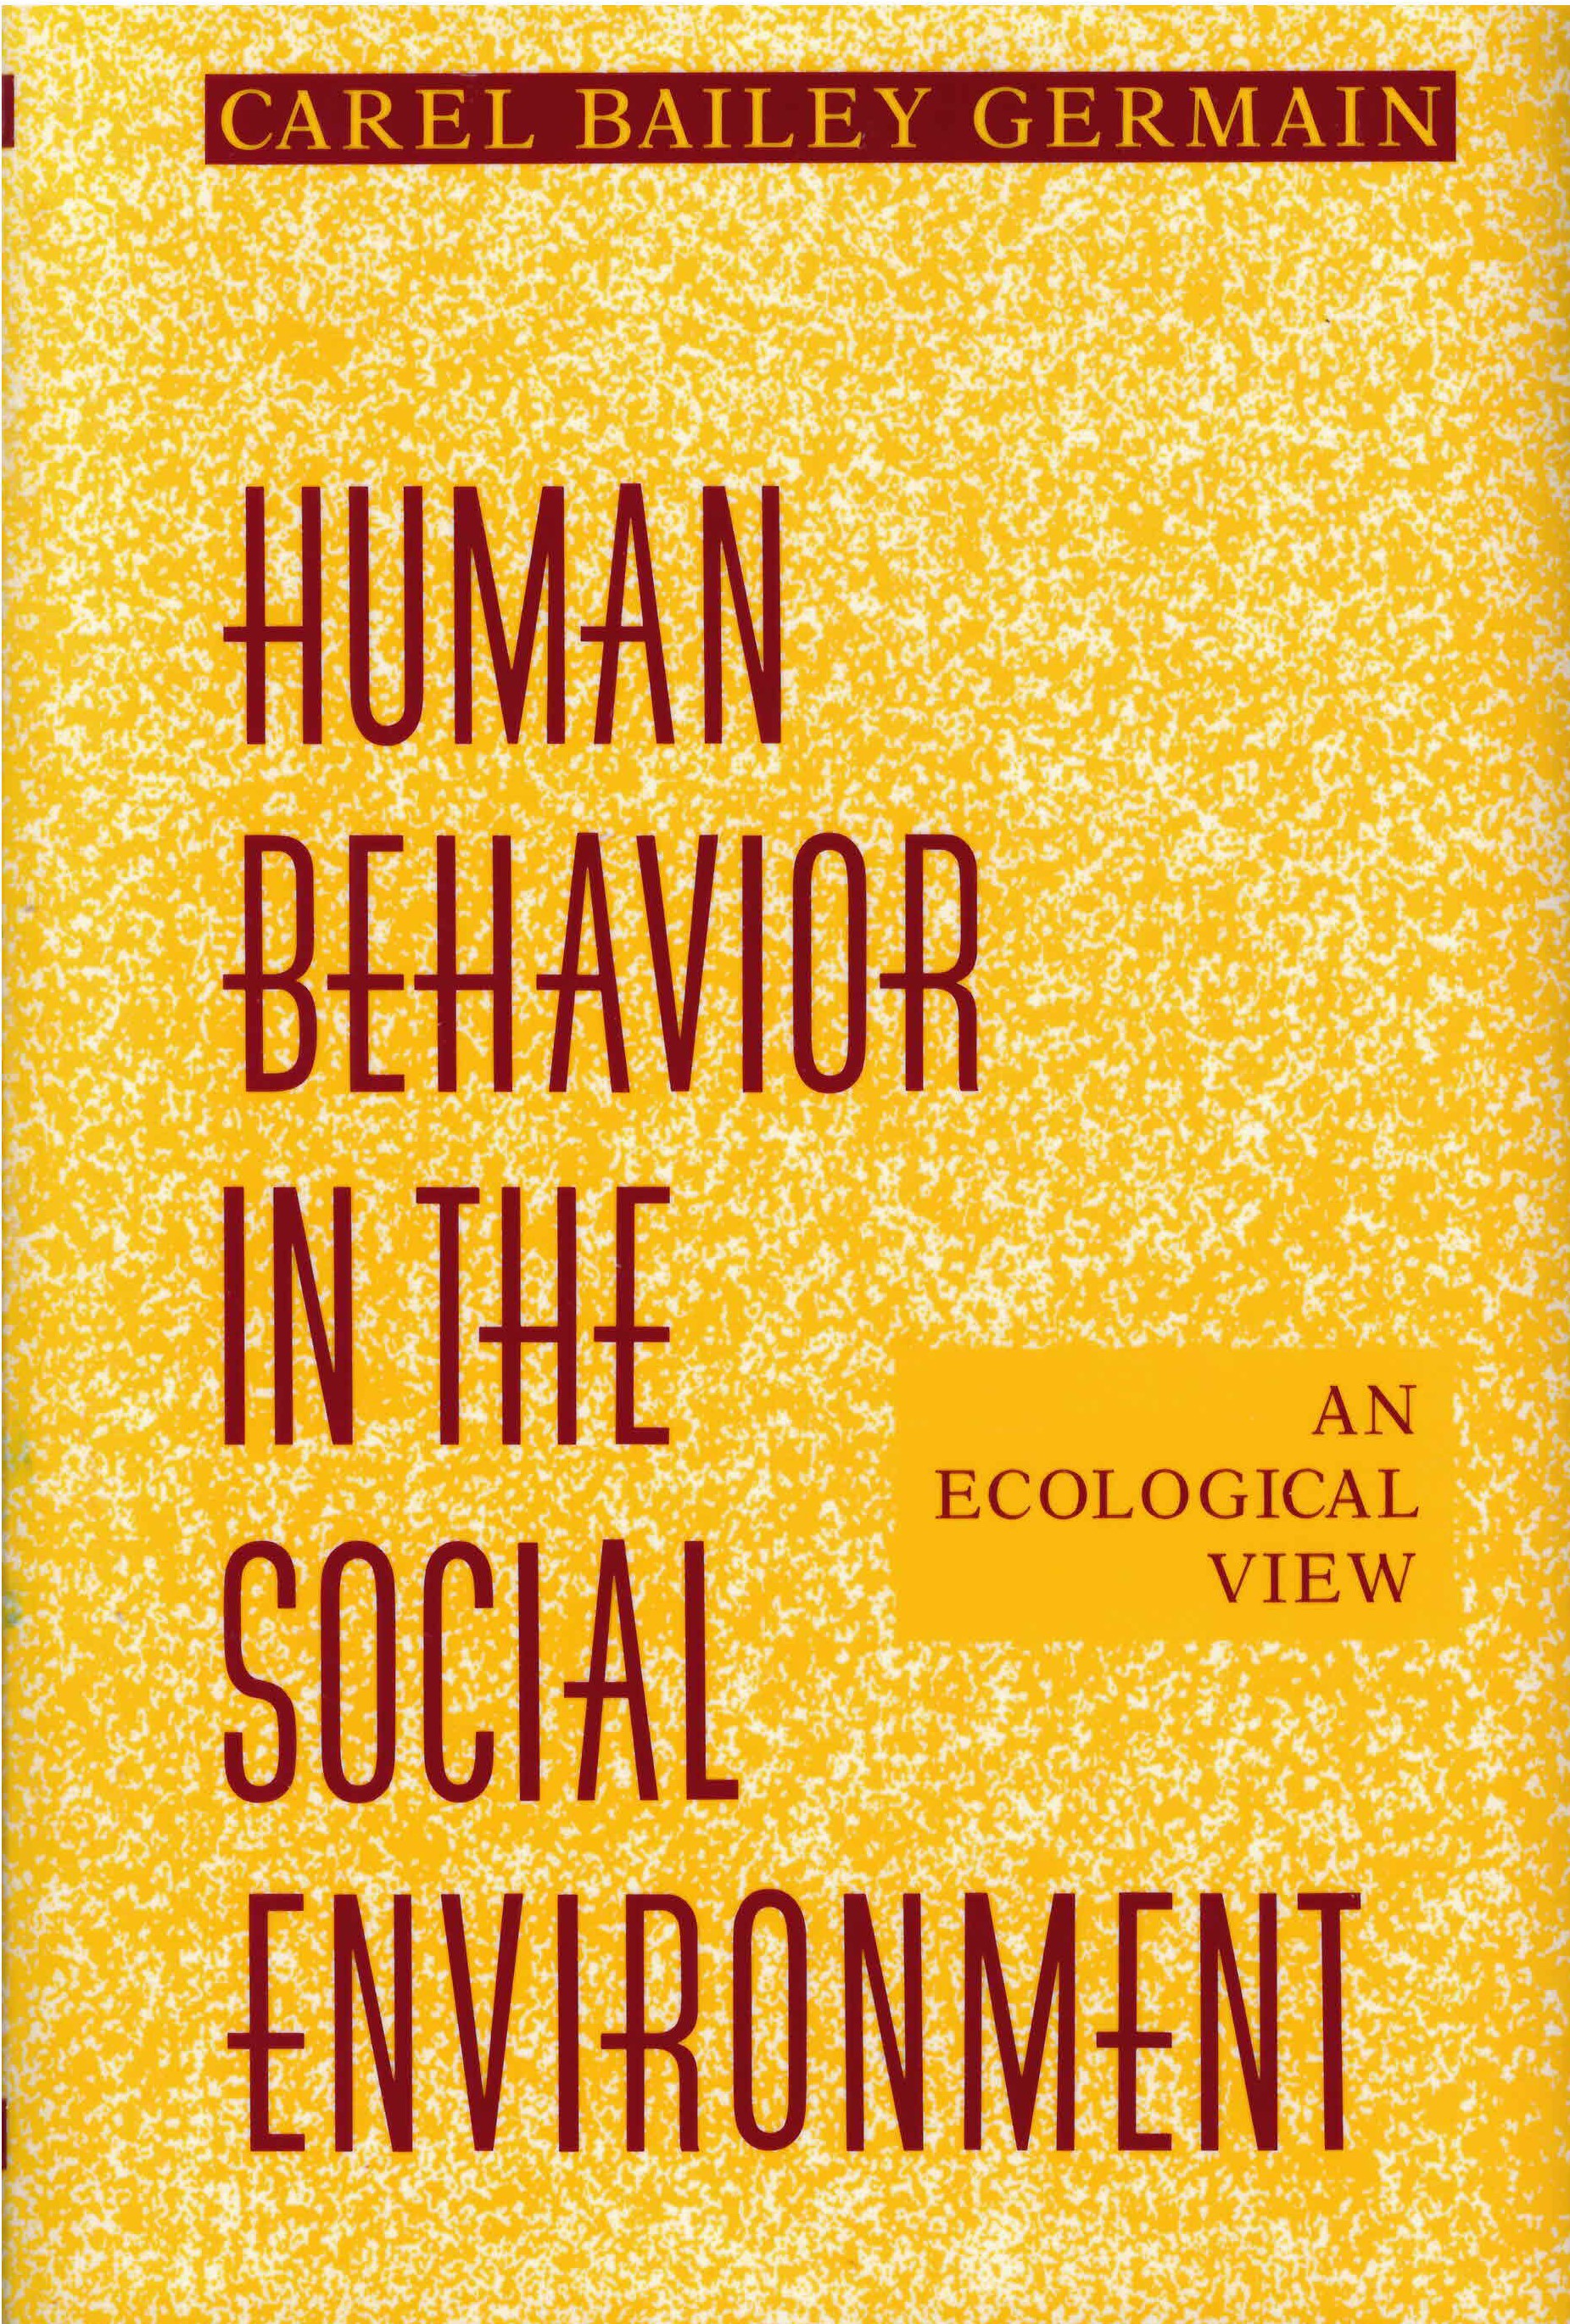 Human behavior in the social environment : an ecological view